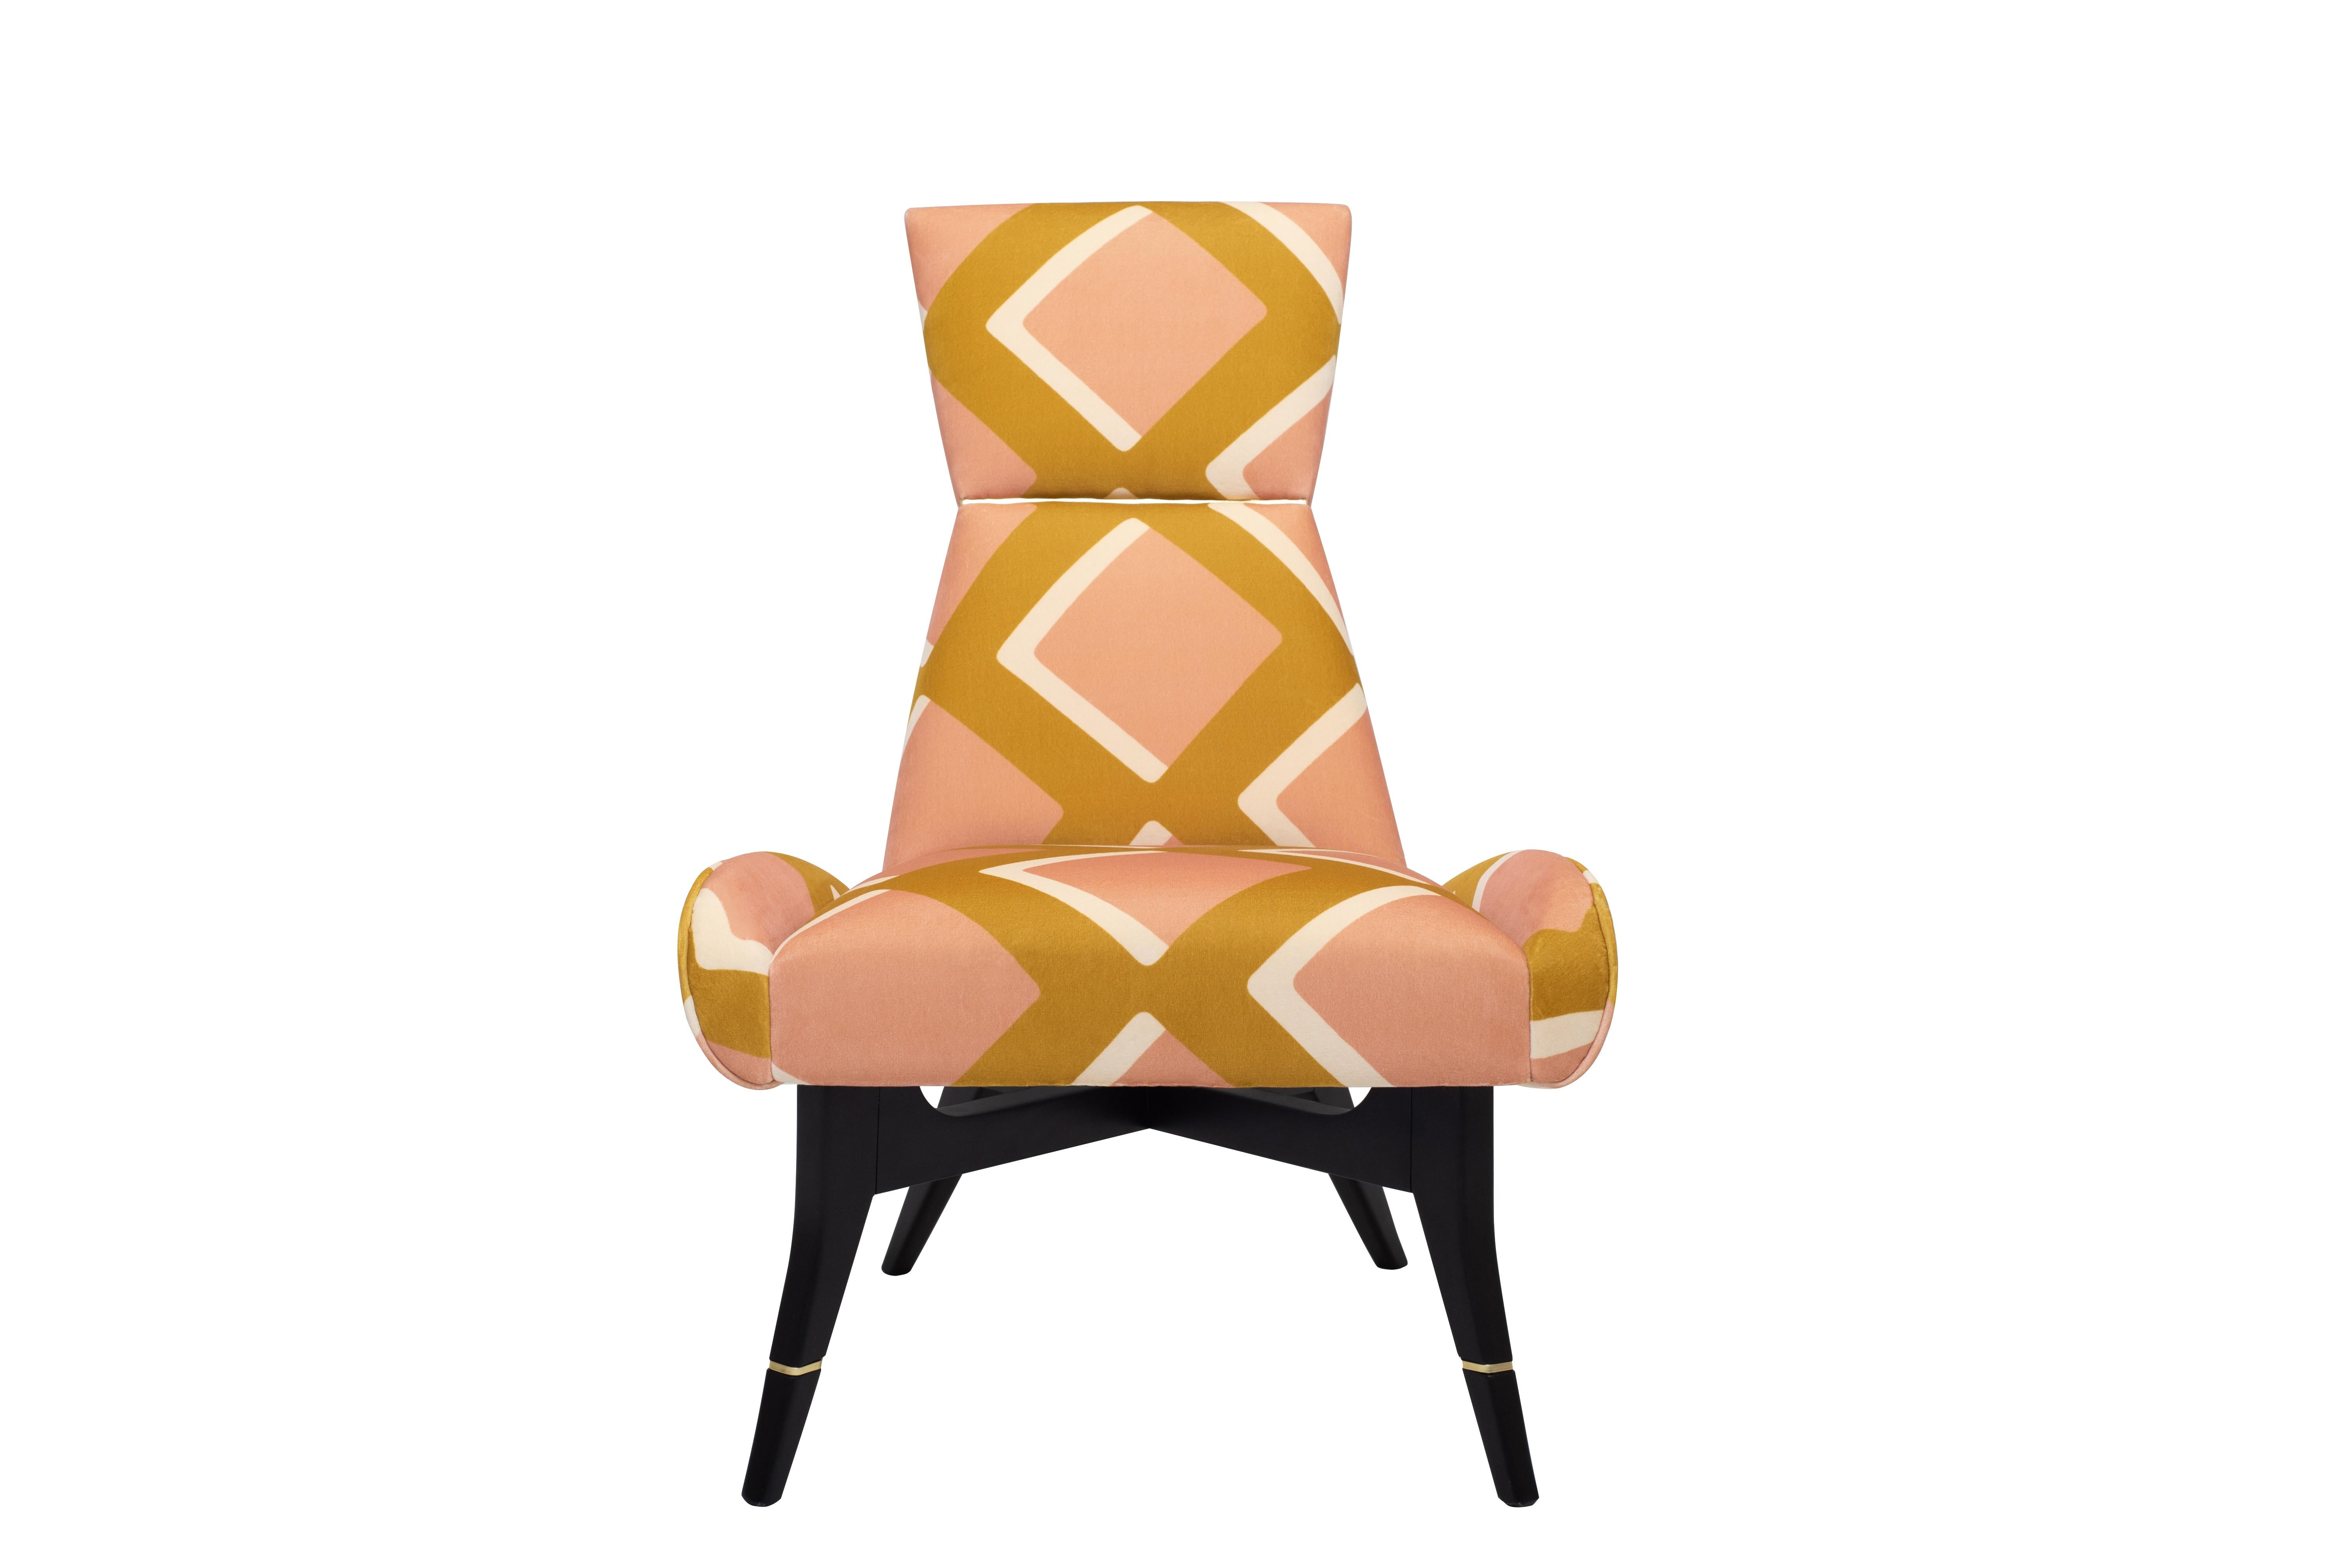 The geometric velvet from the True Velvet collection, designed by India Mahdavi for Pierre Frey, dresses the Uni armchair by Matì.
The polychrome and cosmopolitan style of this fabric joins the hourglass design of the backrest, producing an